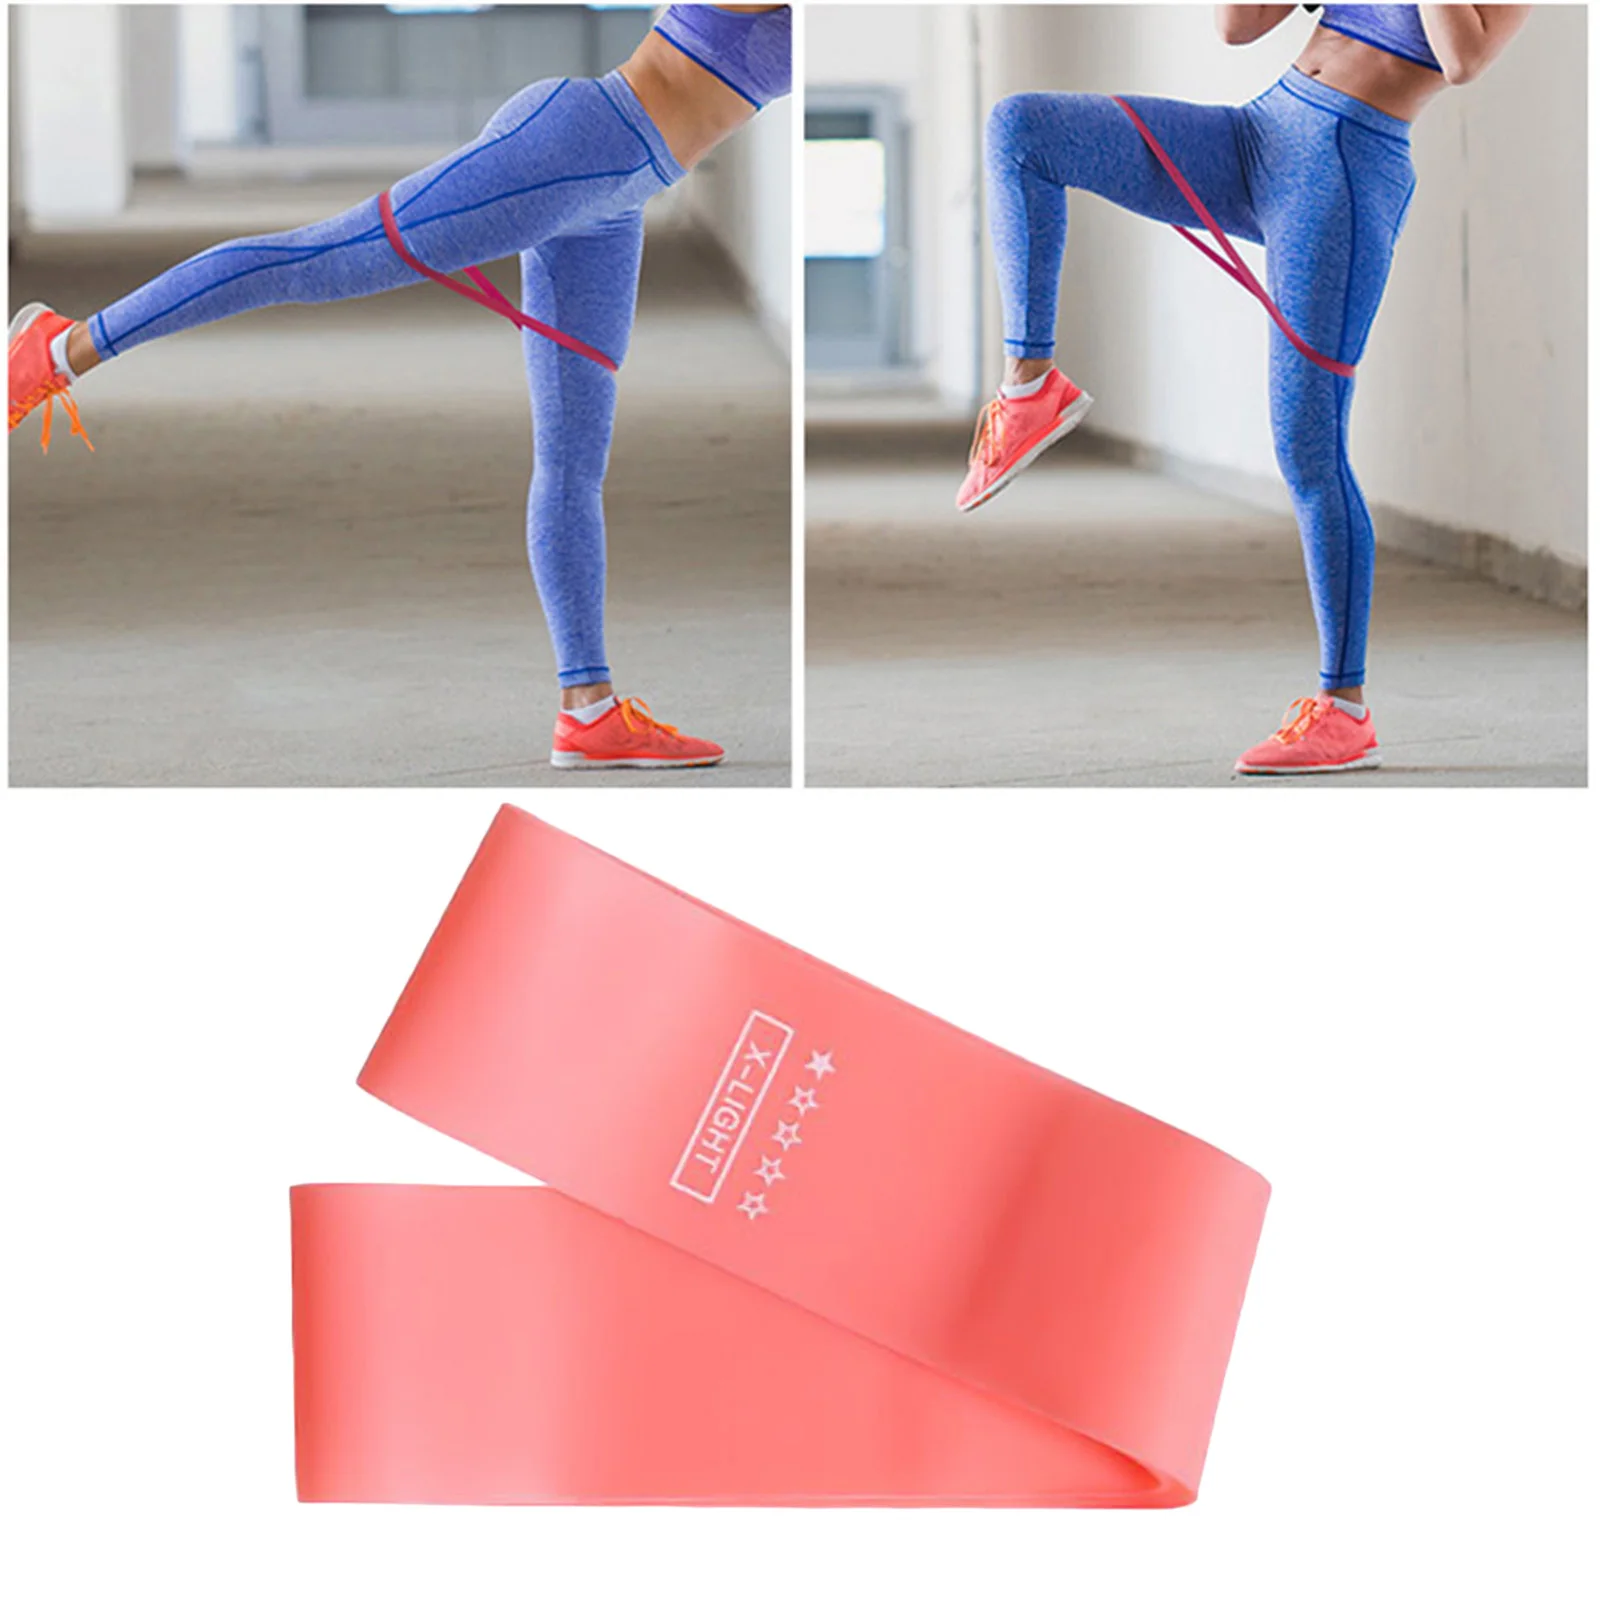 Resistance Band - Best Exercise Band for Women and Men Elastic Workout Band for